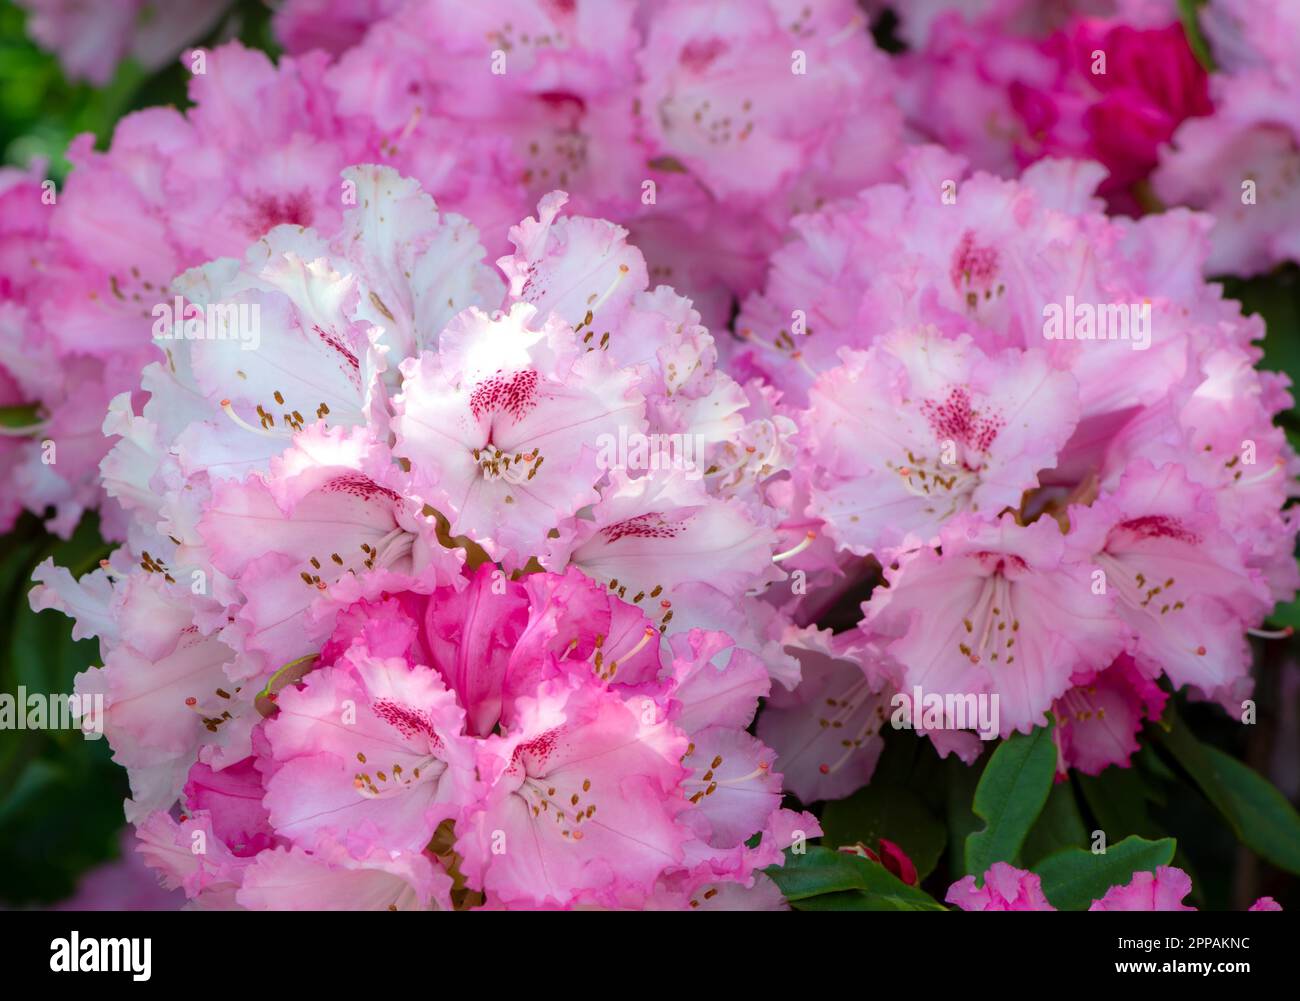 Blossoms of a pink flowering Rhododendron bush Stock Photo